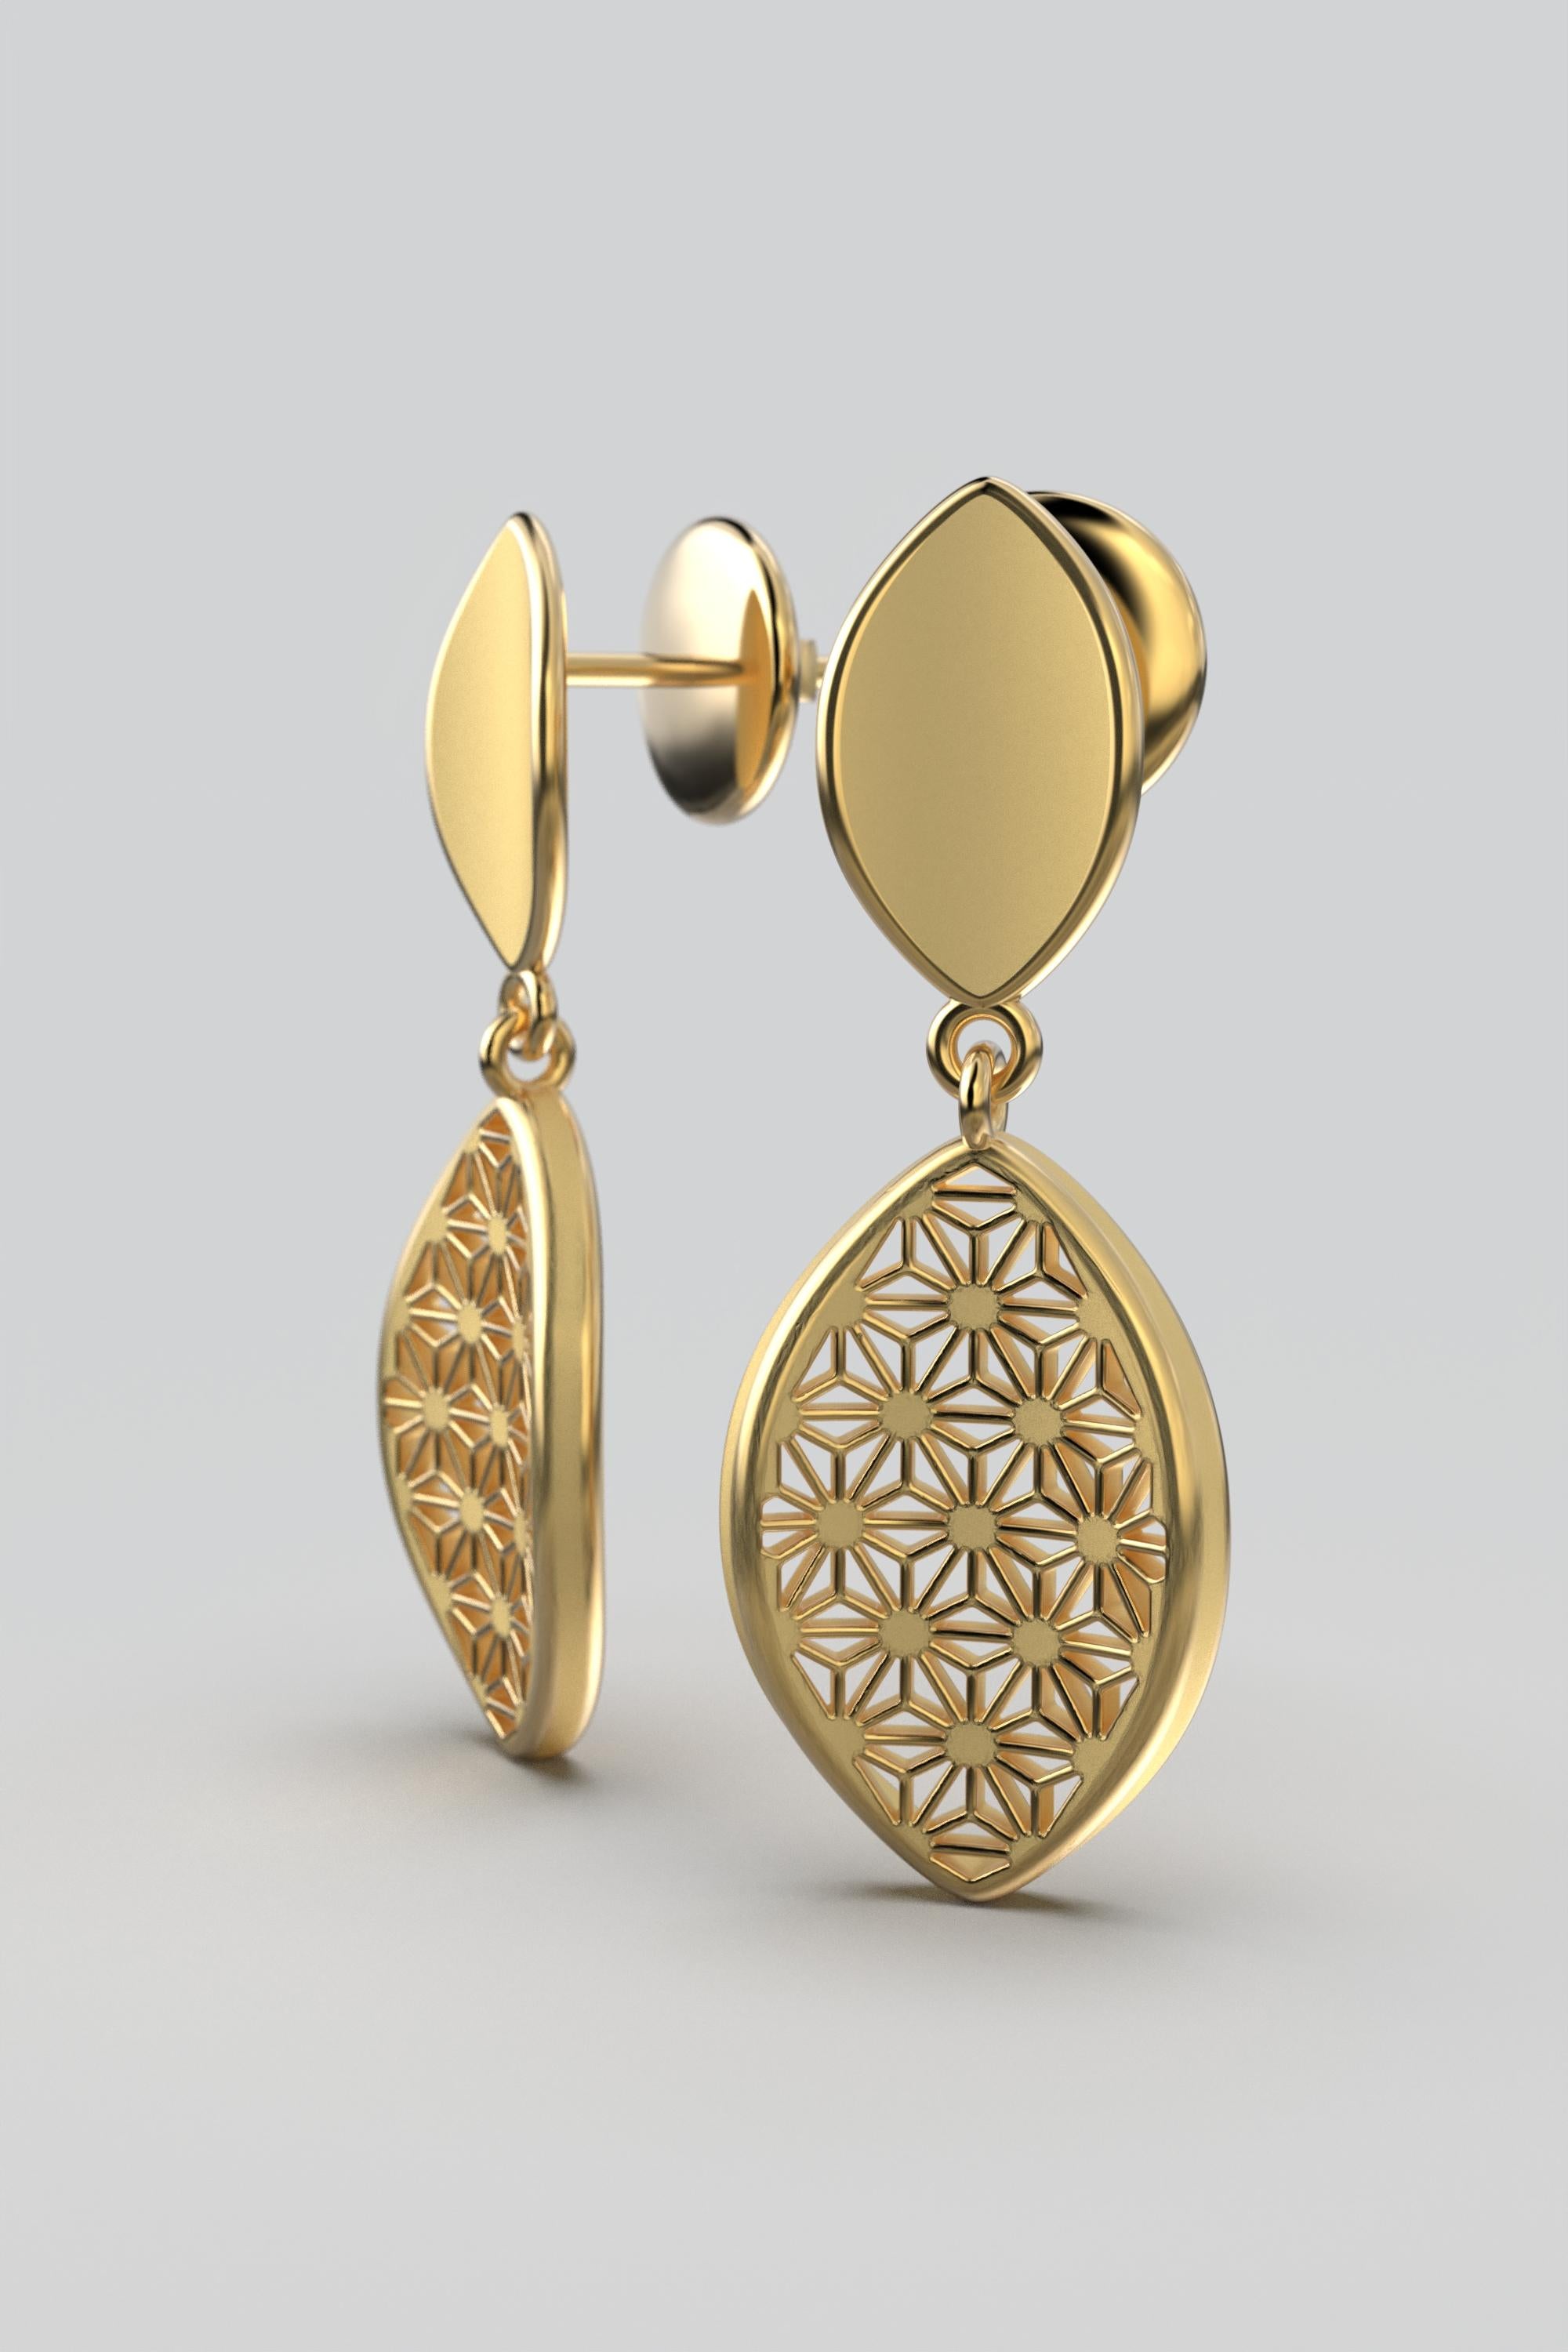 Discover exquisite Italian Solid Gold Earrings made in Italy. Our collection features elegant gold Earrings, adorned with Sashiko Japanese Pattern for a unique touch. Explore our curated selection of Dangle Drop Earrings, meticulously crafted with